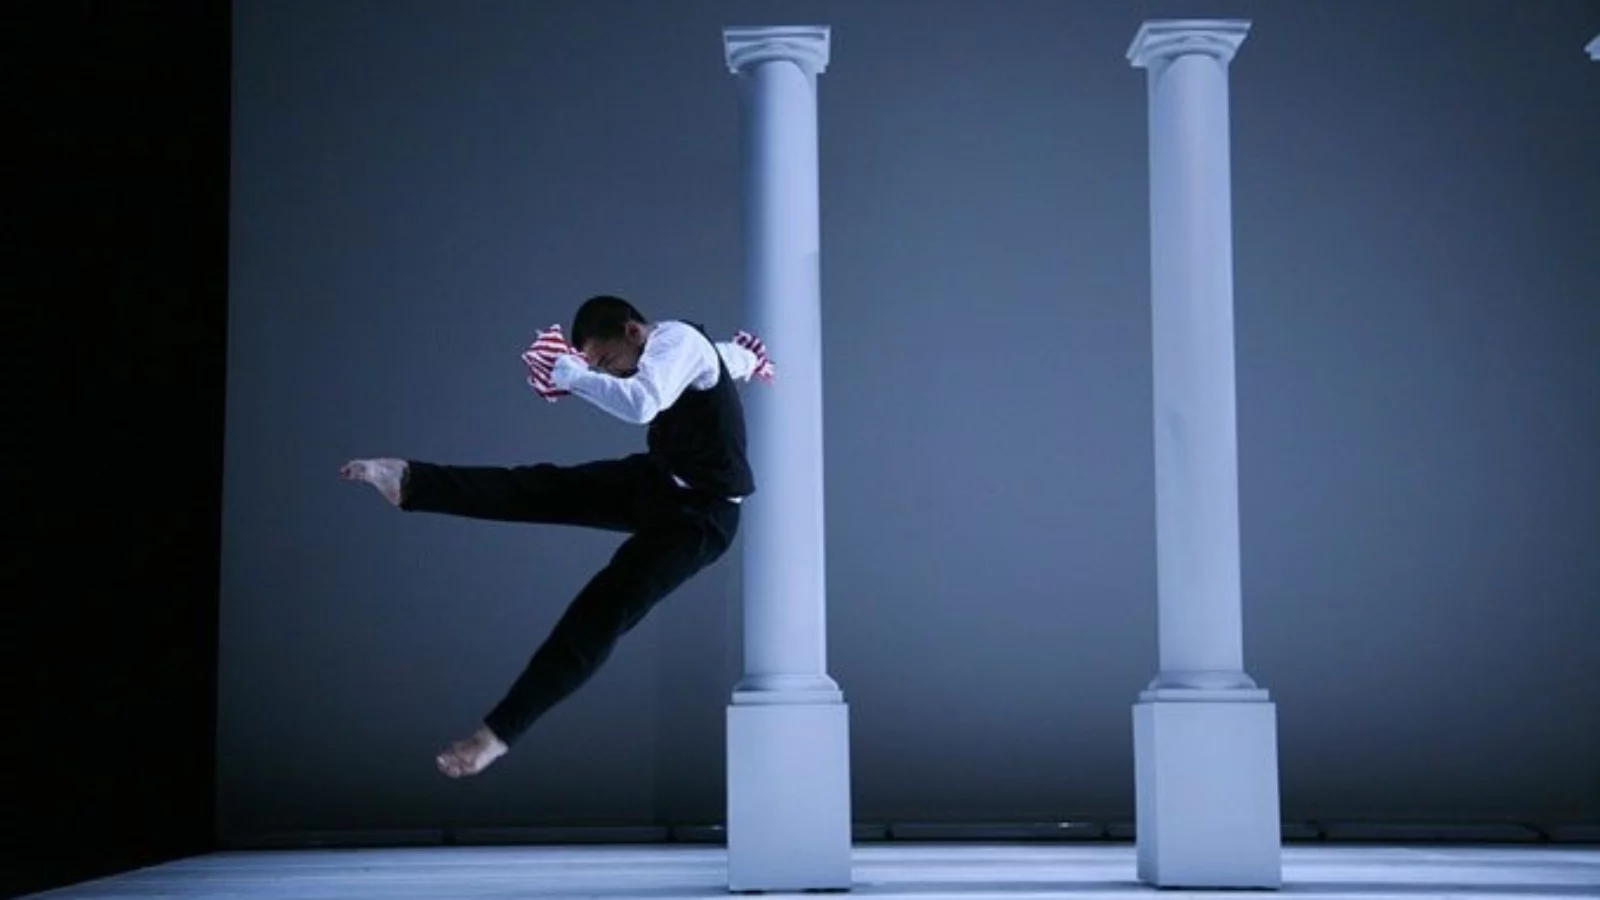 A dancer jumps and kicks their leg in front of a row of white pillars